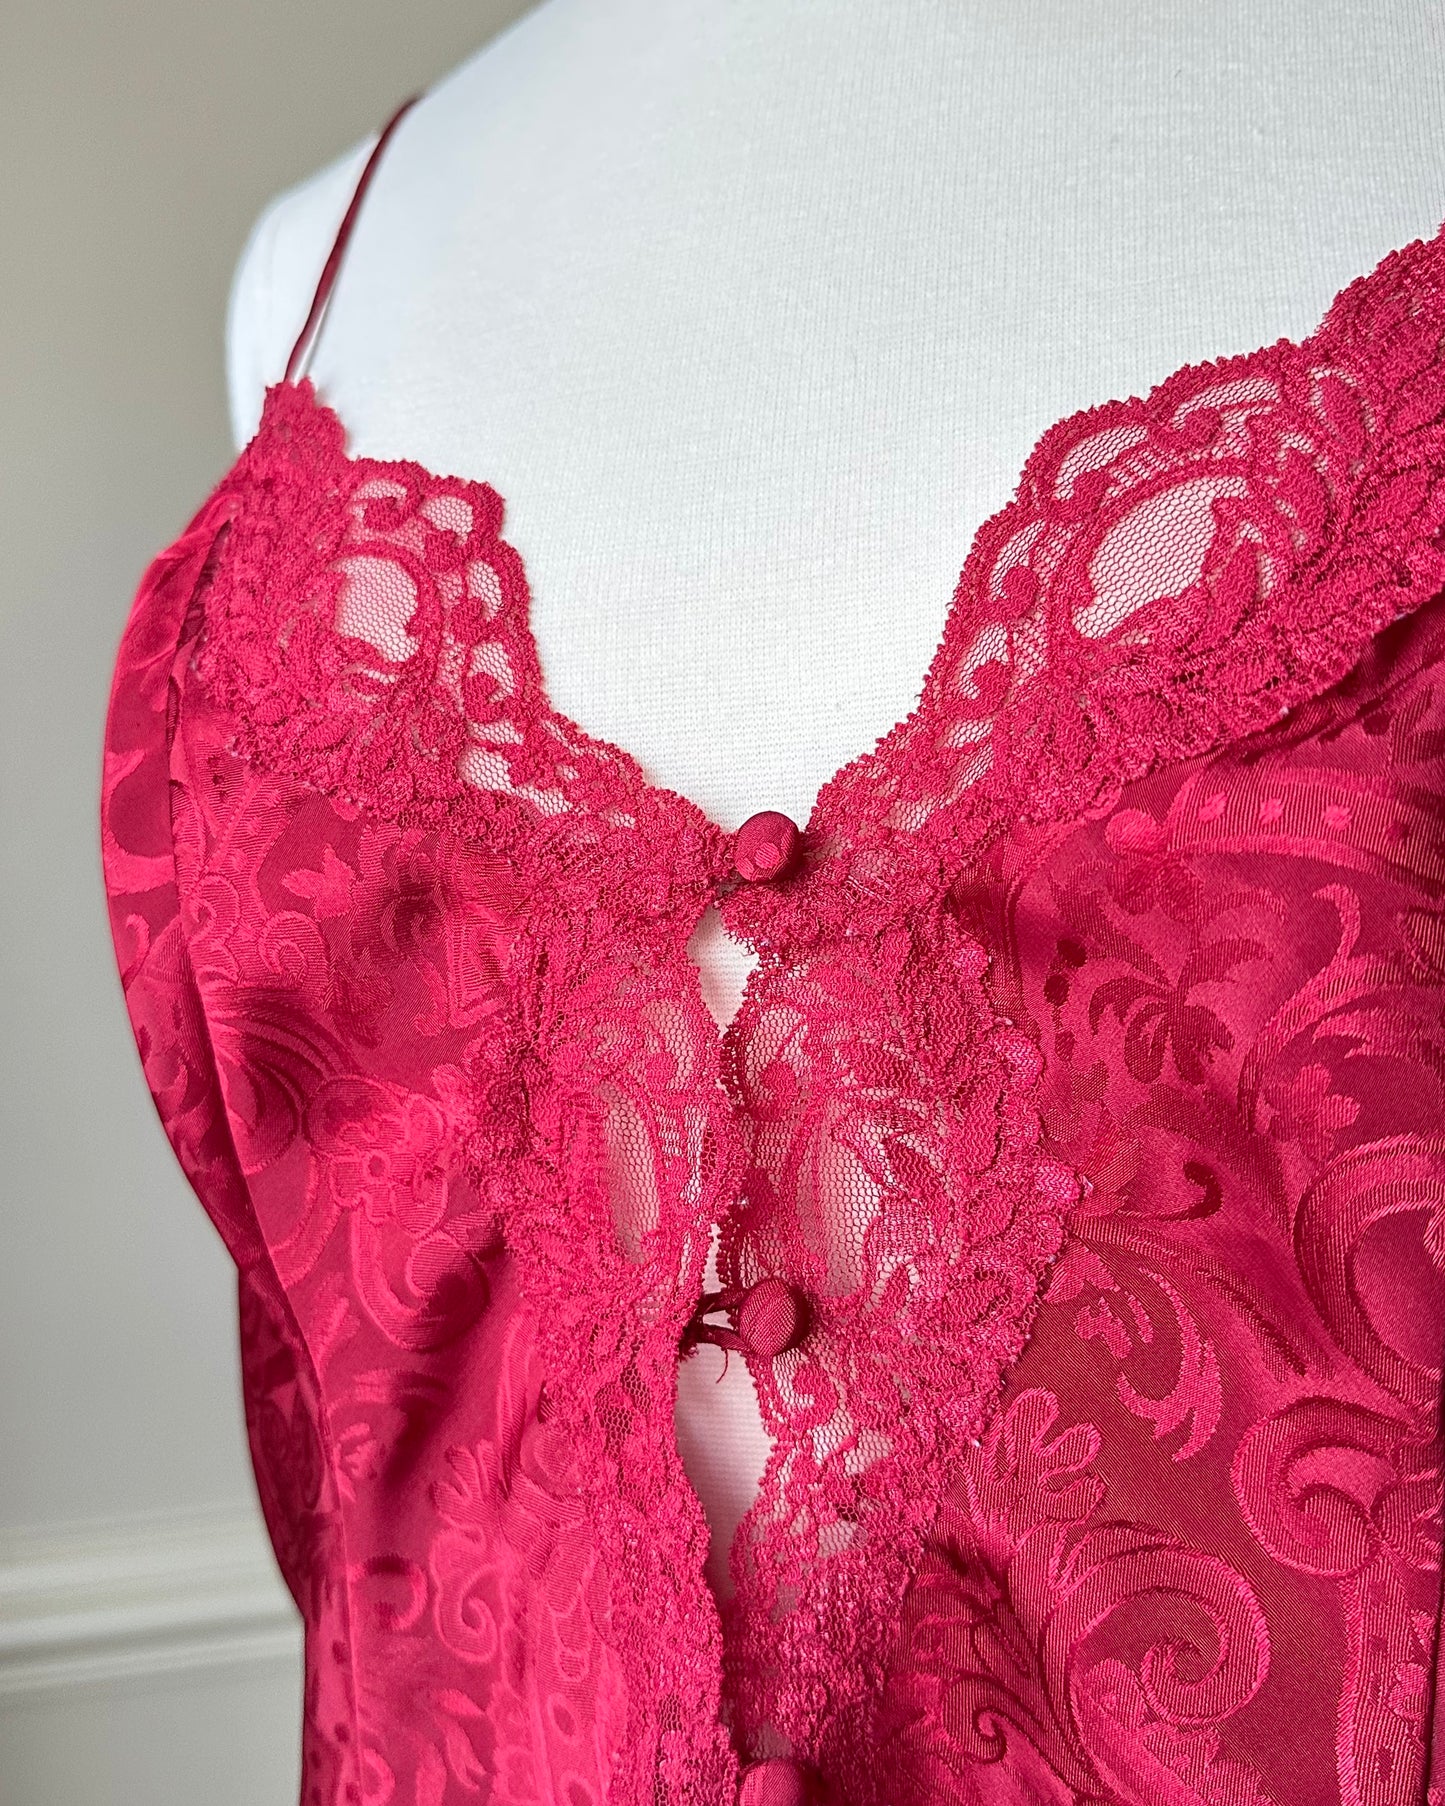 RARE Victoria’s Secret Deep Red Cropped Camisole featuring Embossed Paisley Prints